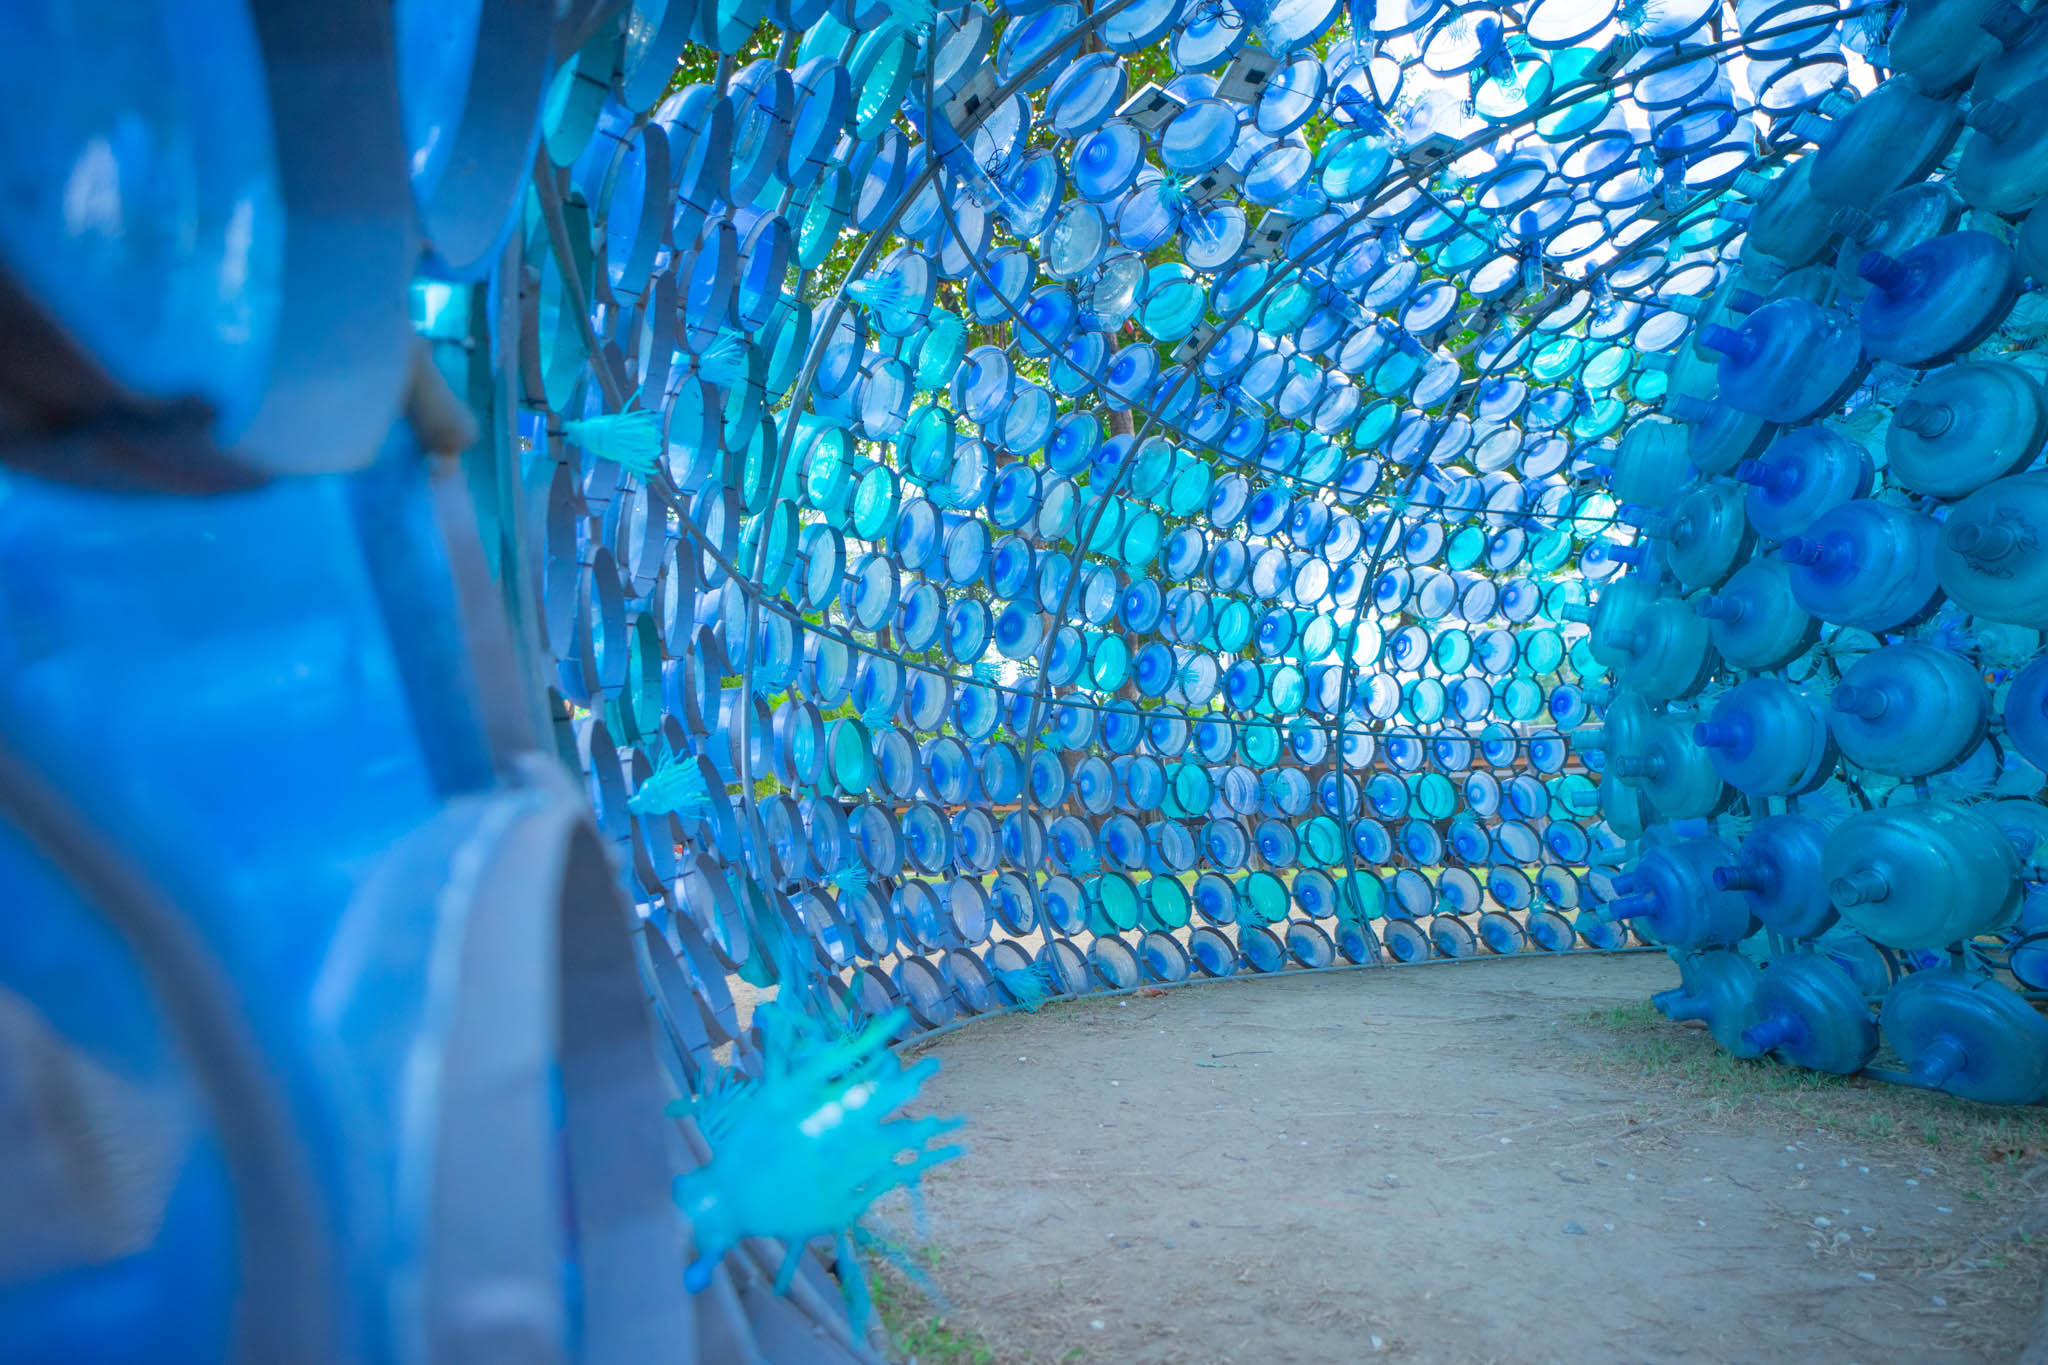 The inside of Elemental, an art installation of recycled materials by Leeroy New